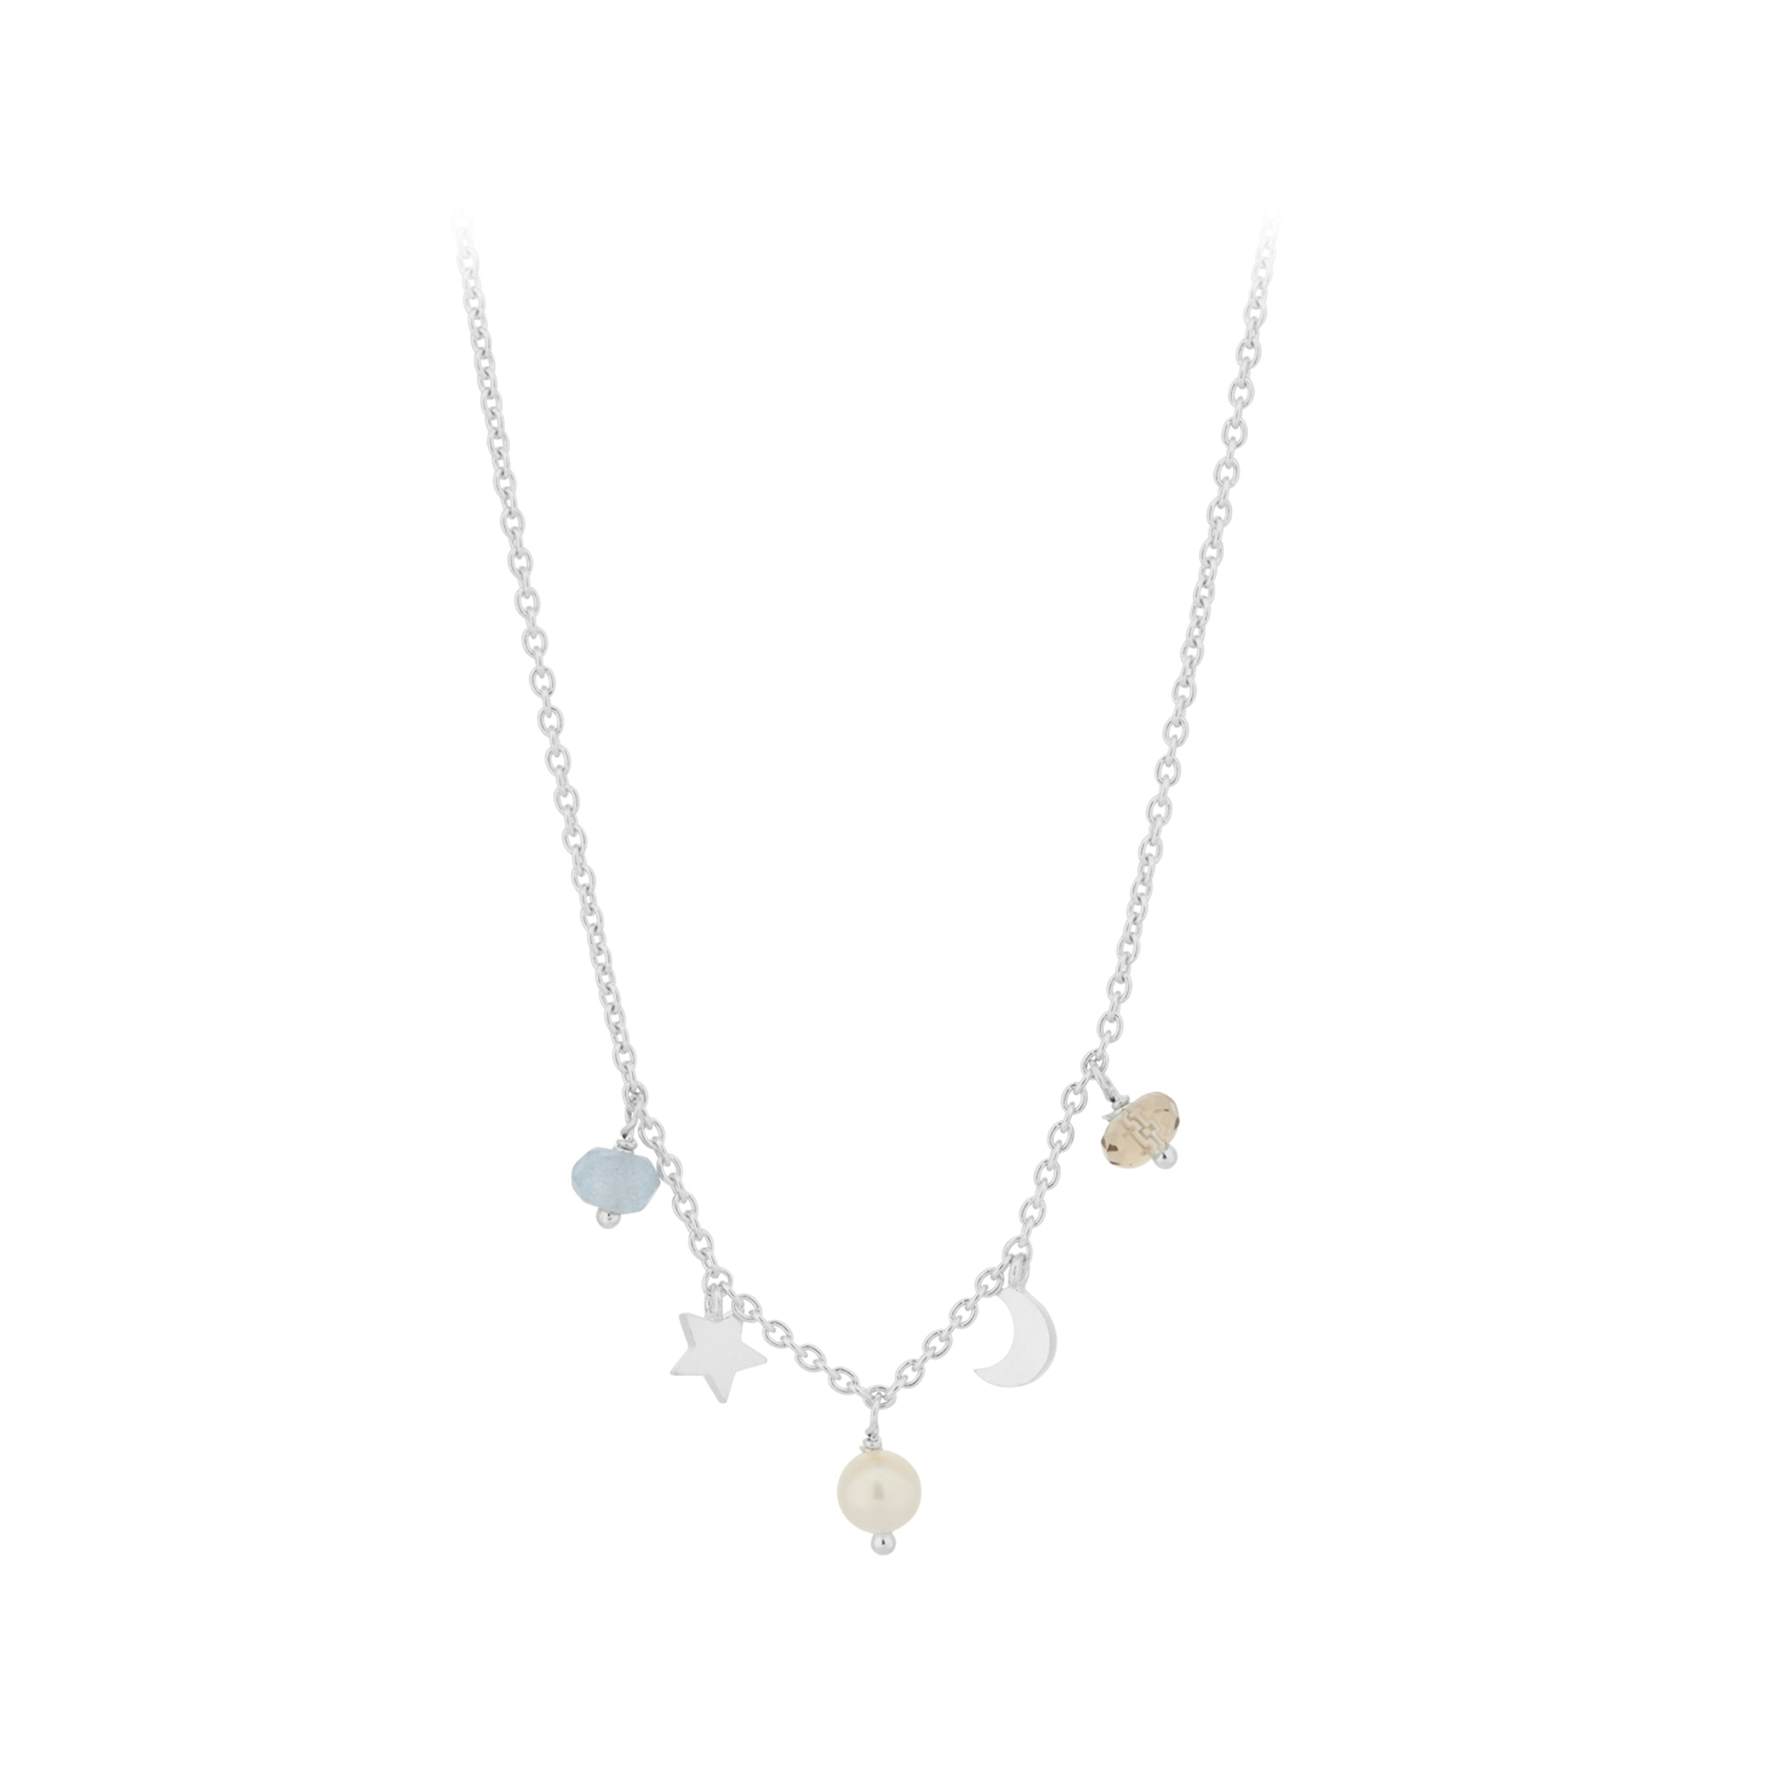 Dream Necklace from Pernille Corydon in Silver Sterling 925